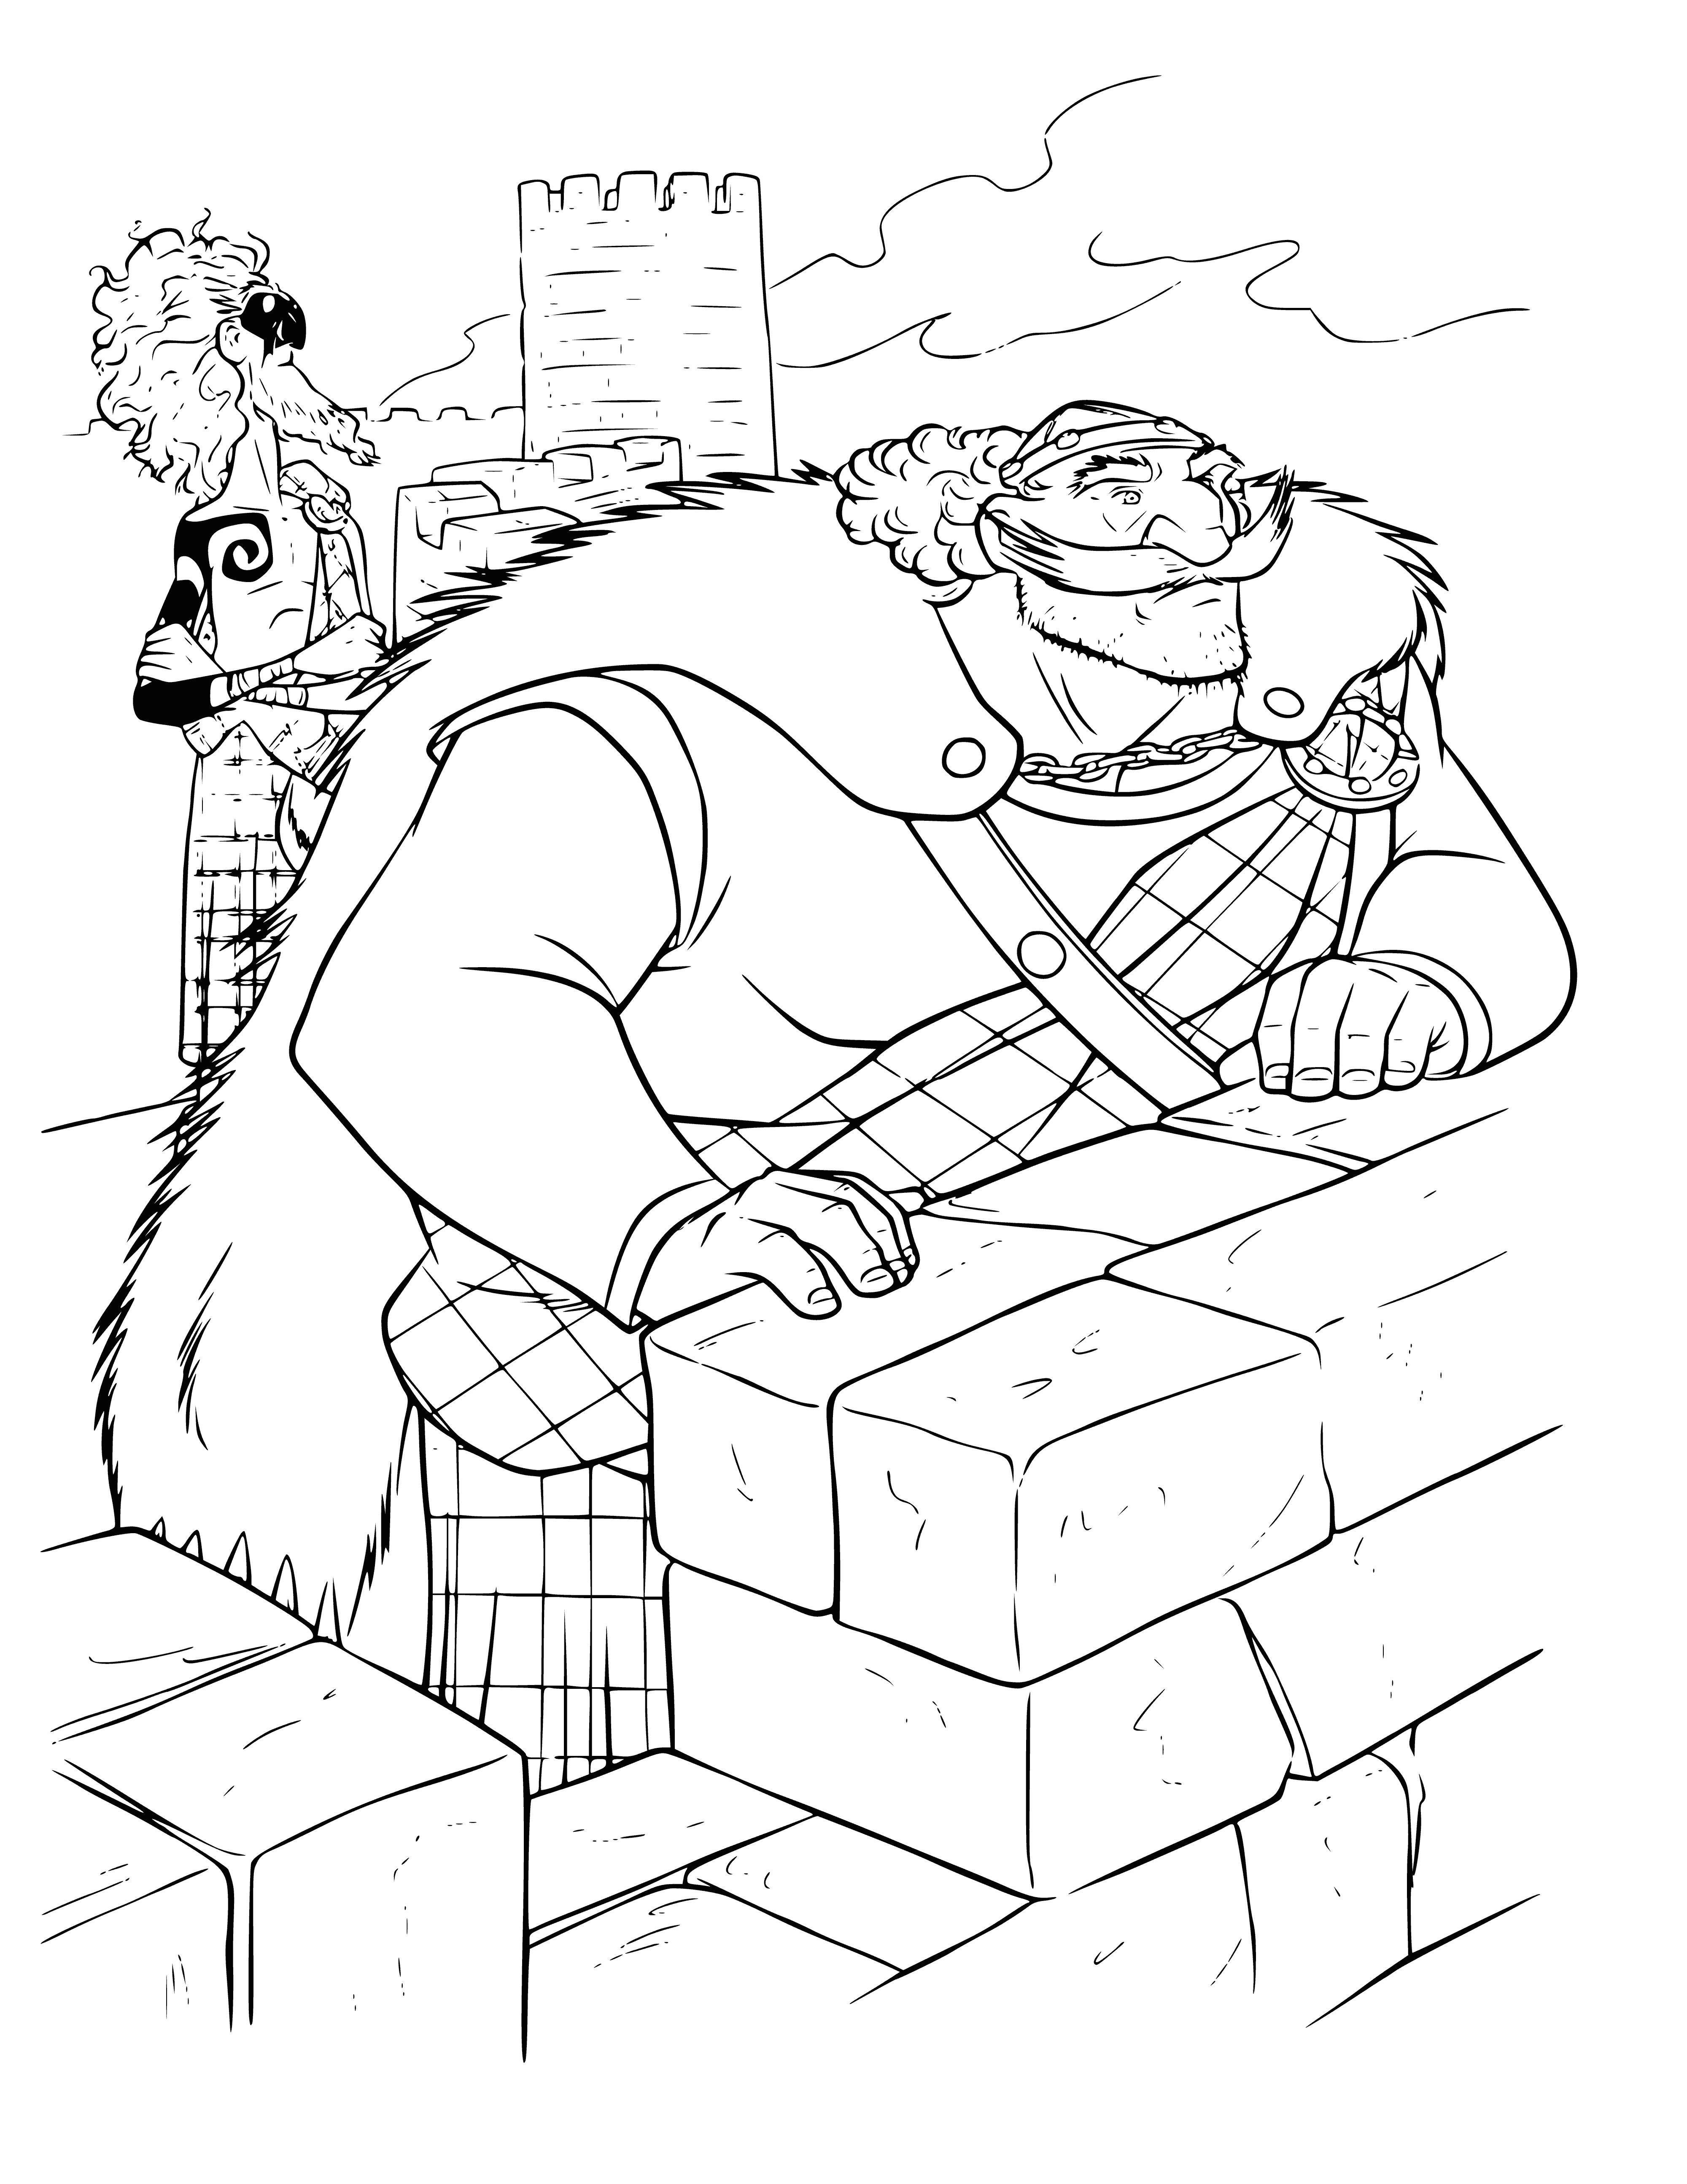 King at the castle wall coloring page